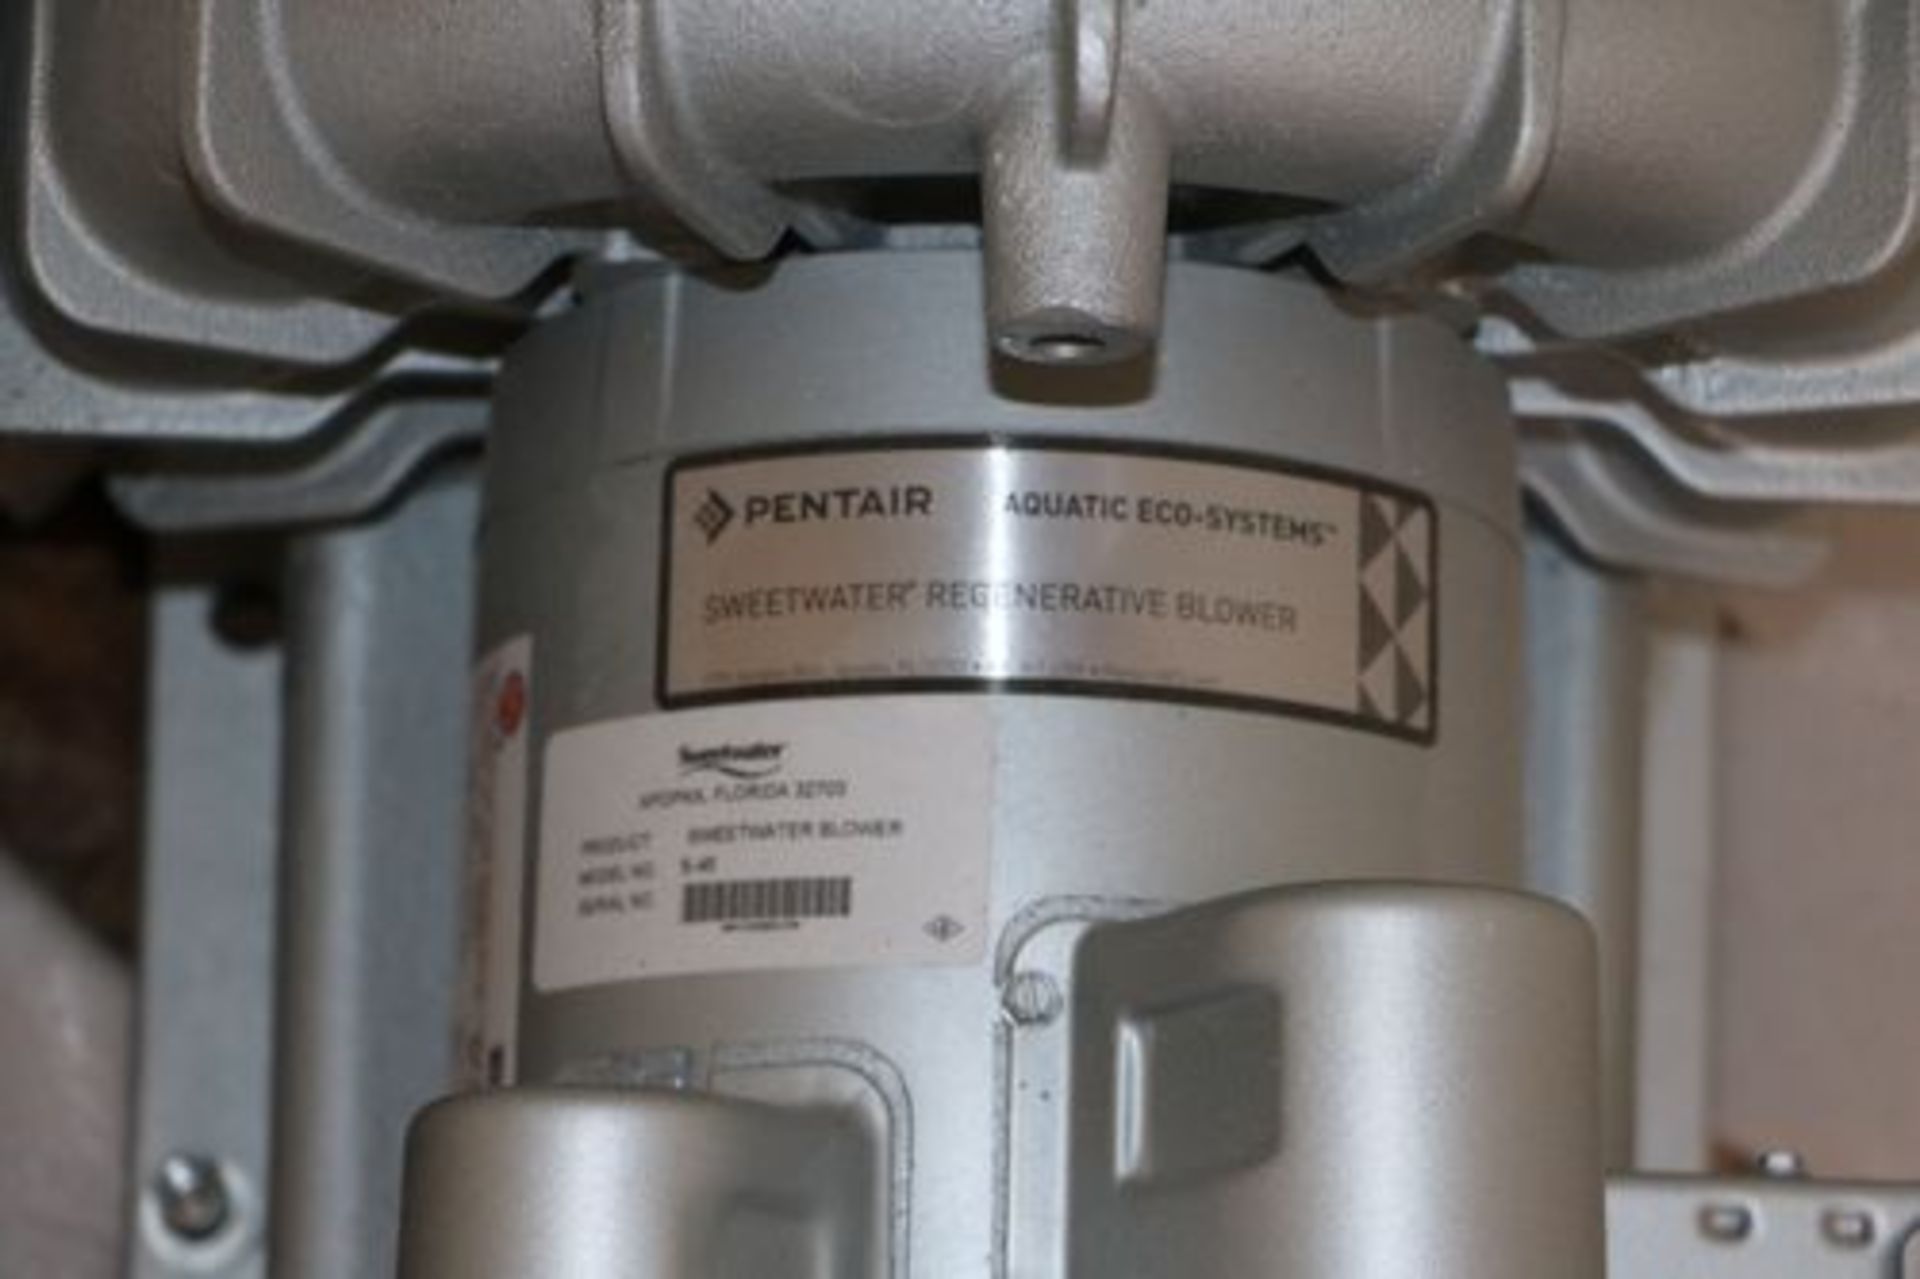 ONE ONLY Pentair Aquatic Eco-Systems Sweetwater Regenerative Blower Model S-45, 1 HP - Image 2 of 6